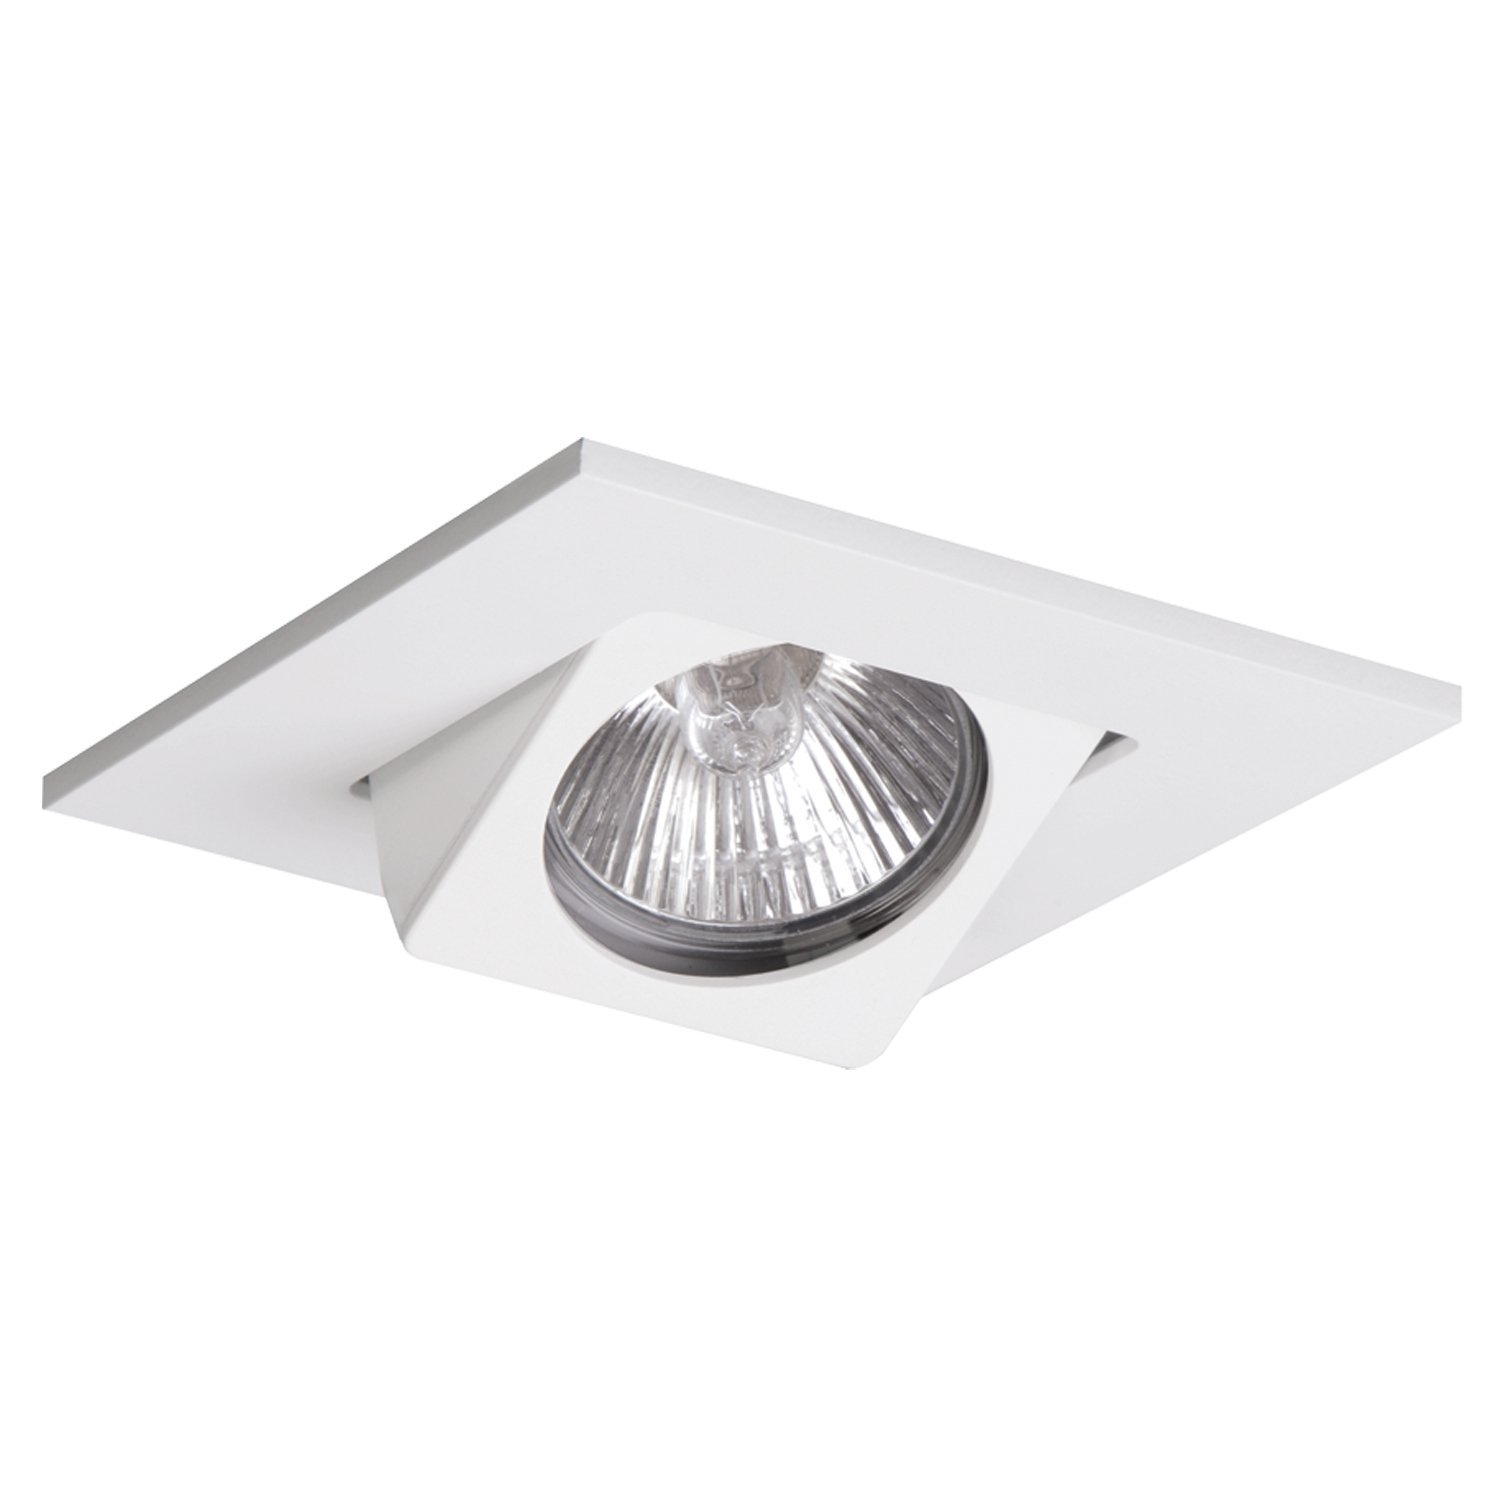 Outdoor Led Ceiling Light Fixtures